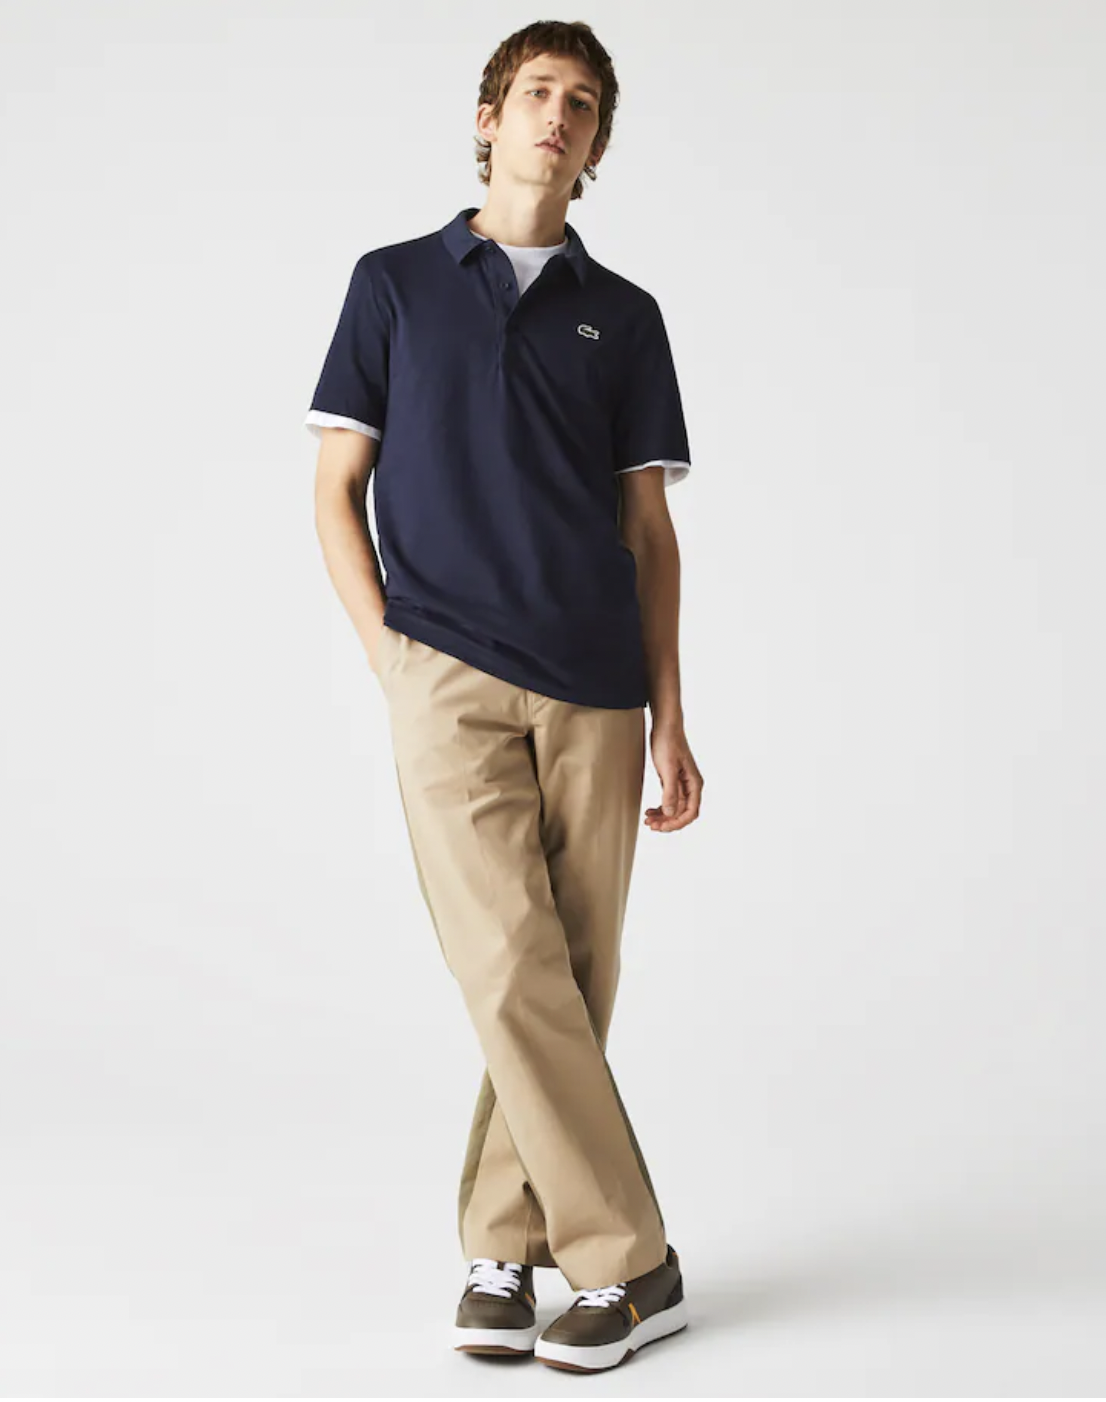 Lacoste: Semi-Annual Sale. Up to 50% off.